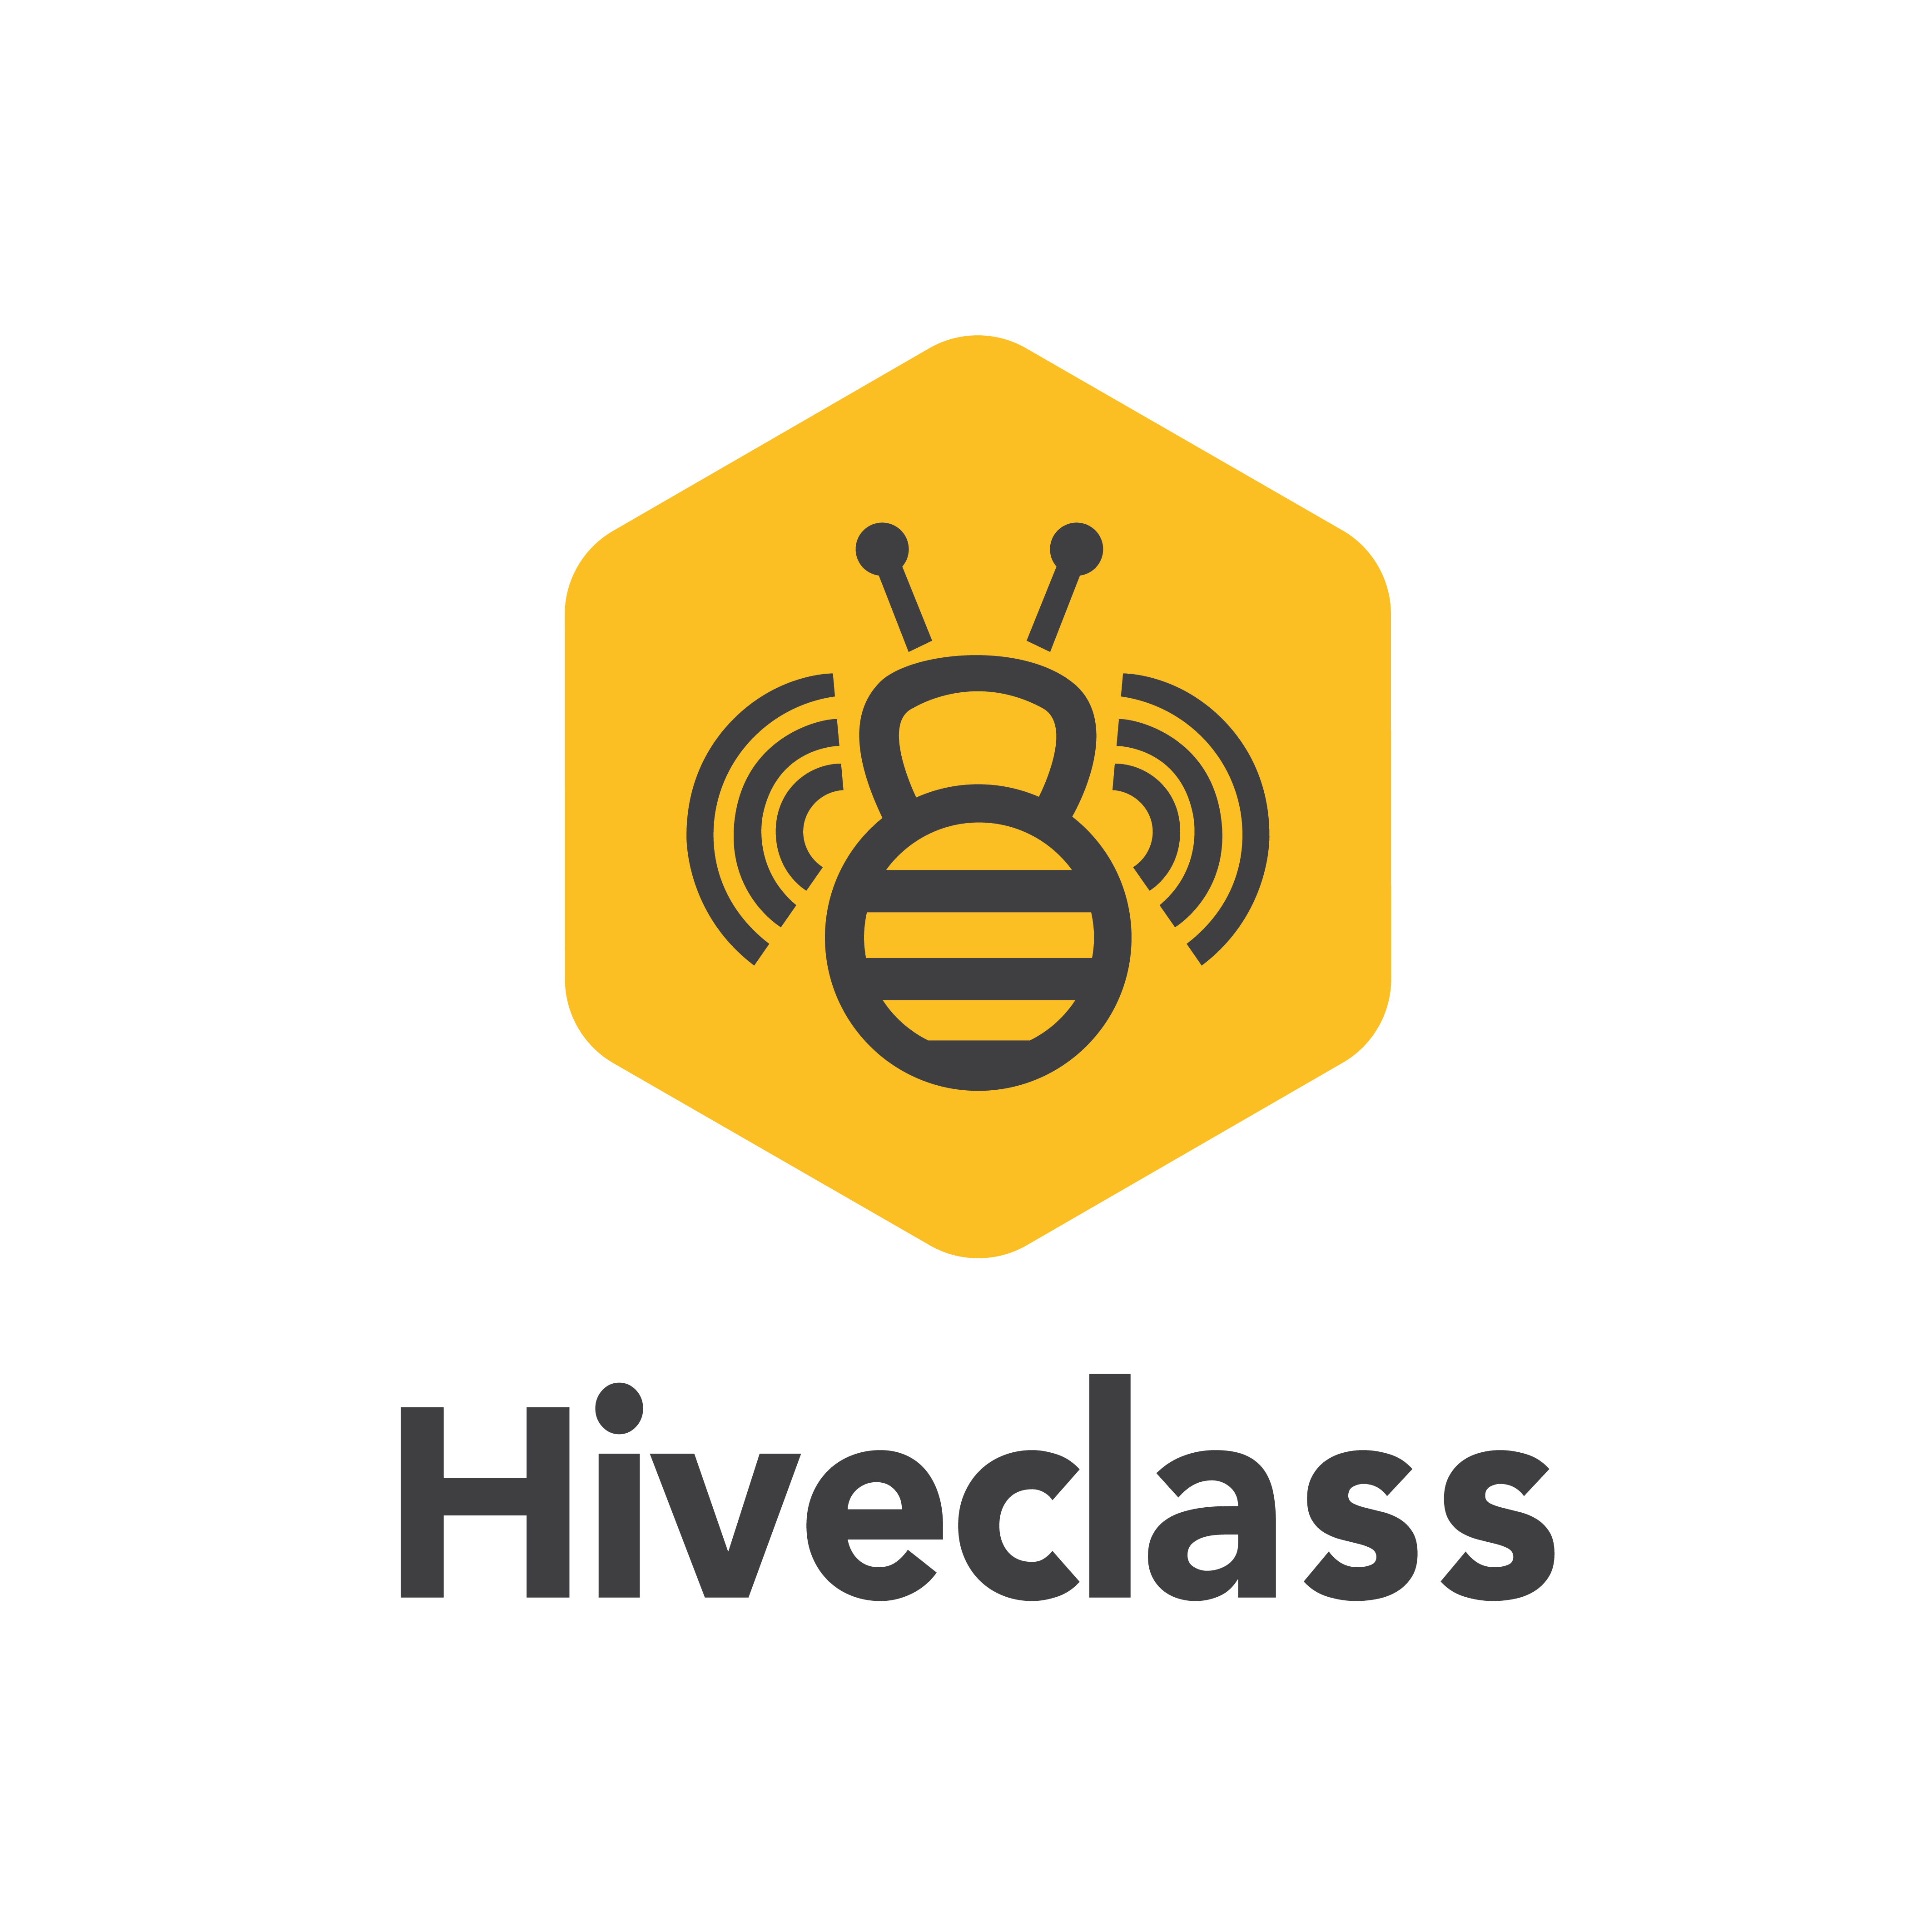 Announcing Hiveclass!